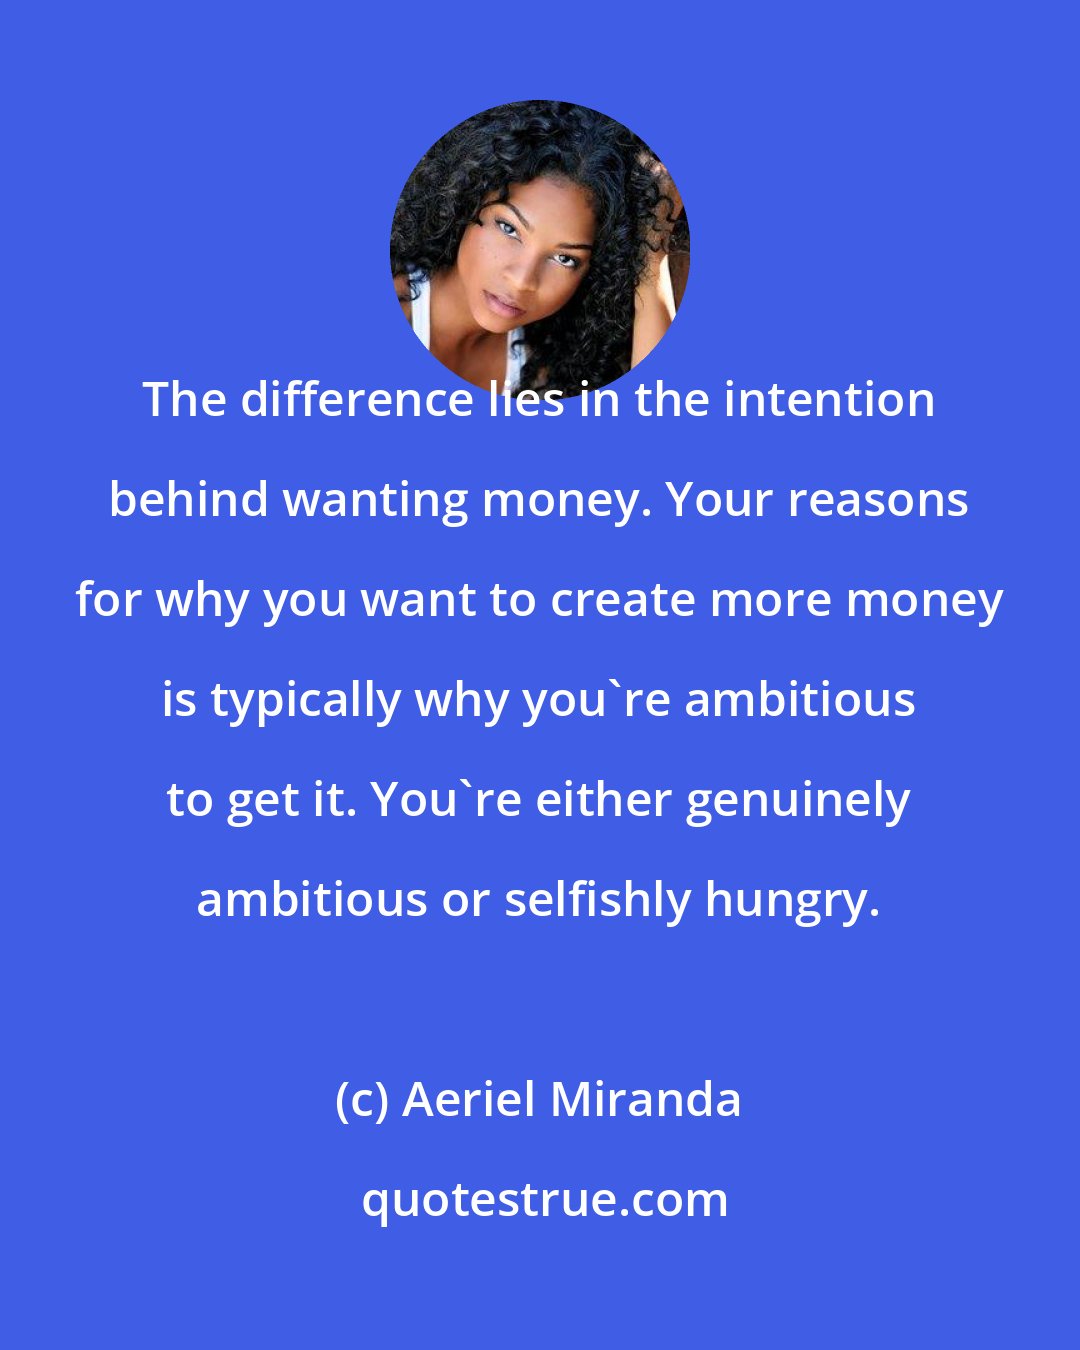 Aeriel Miranda: The difference lies in the intention behind wanting money. Your reasons for why you want to create more money is typically why you're ambitious to get it. You're either genuinely ambitious or selfishly hungry.